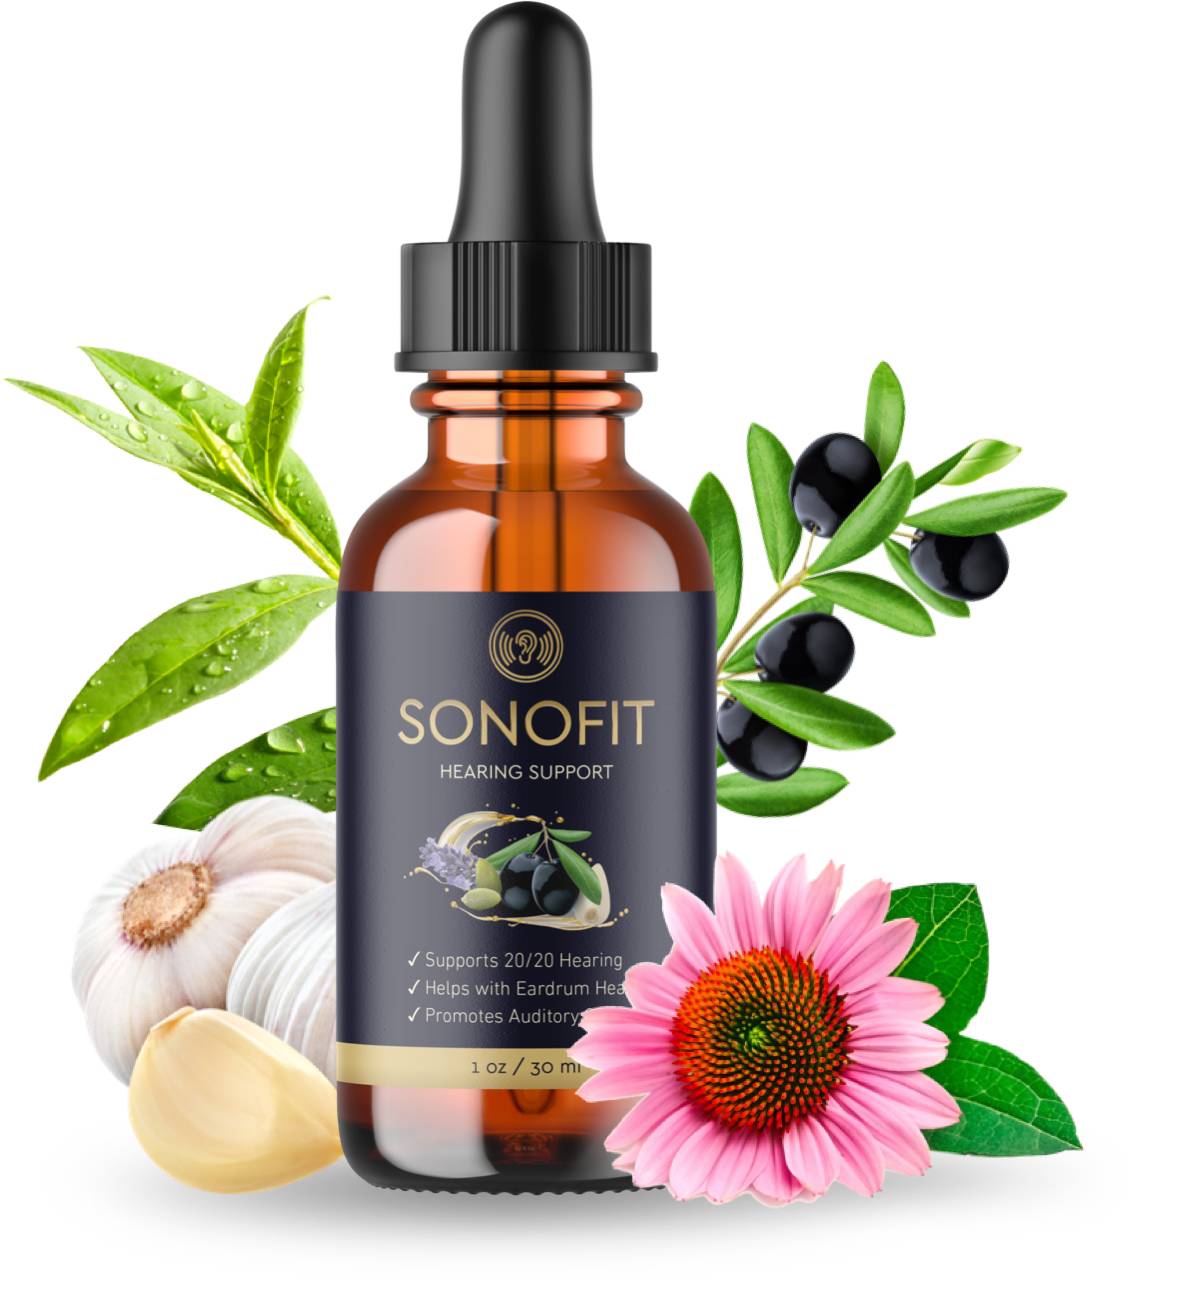 SonoFit is a hearing support supplement